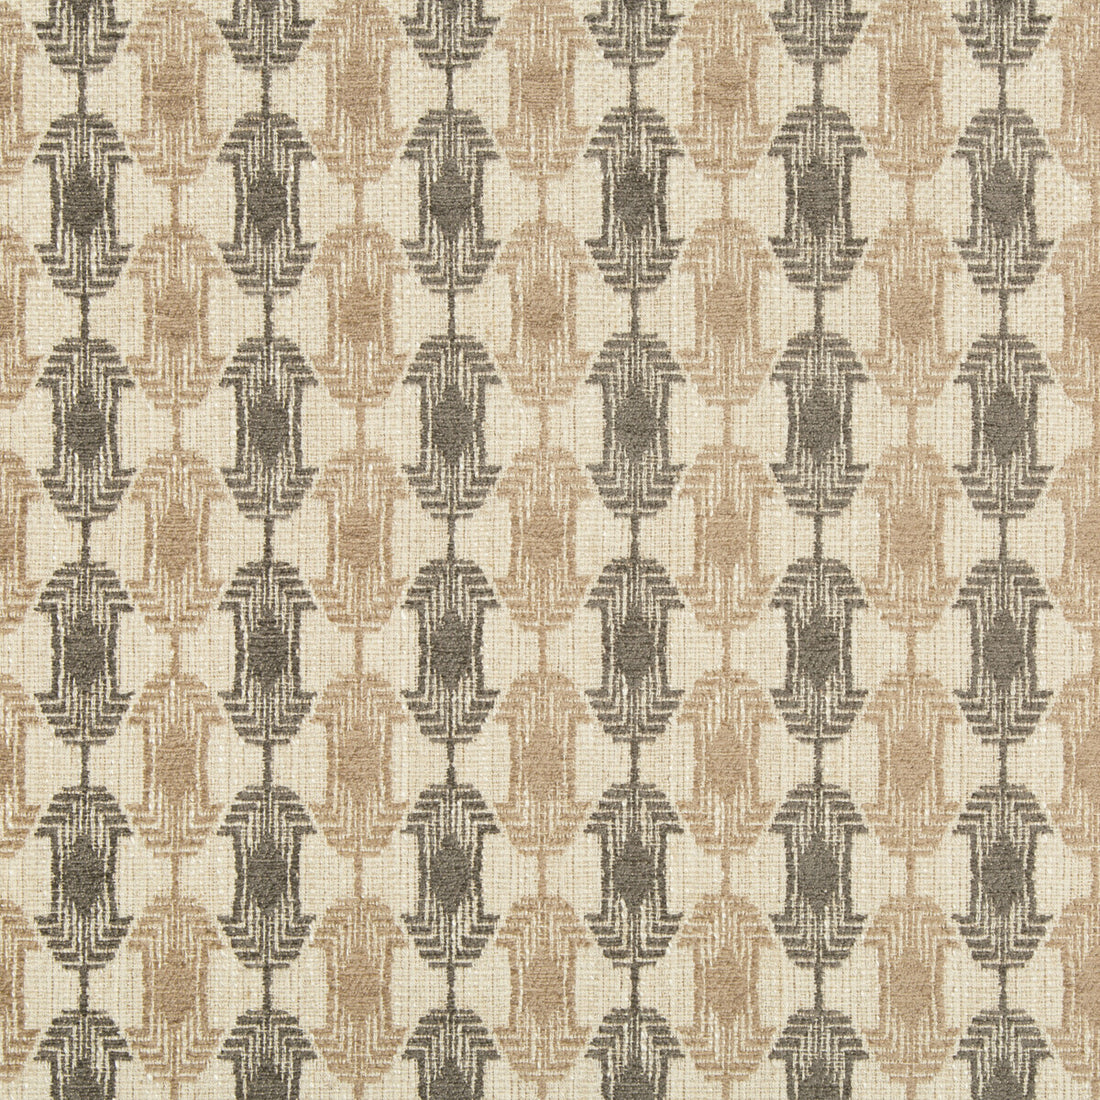 Quartz Weave fabric in natural metal color - pattern GWF-3751.168.0 - by Lee Jofa Modern in the Gems collection